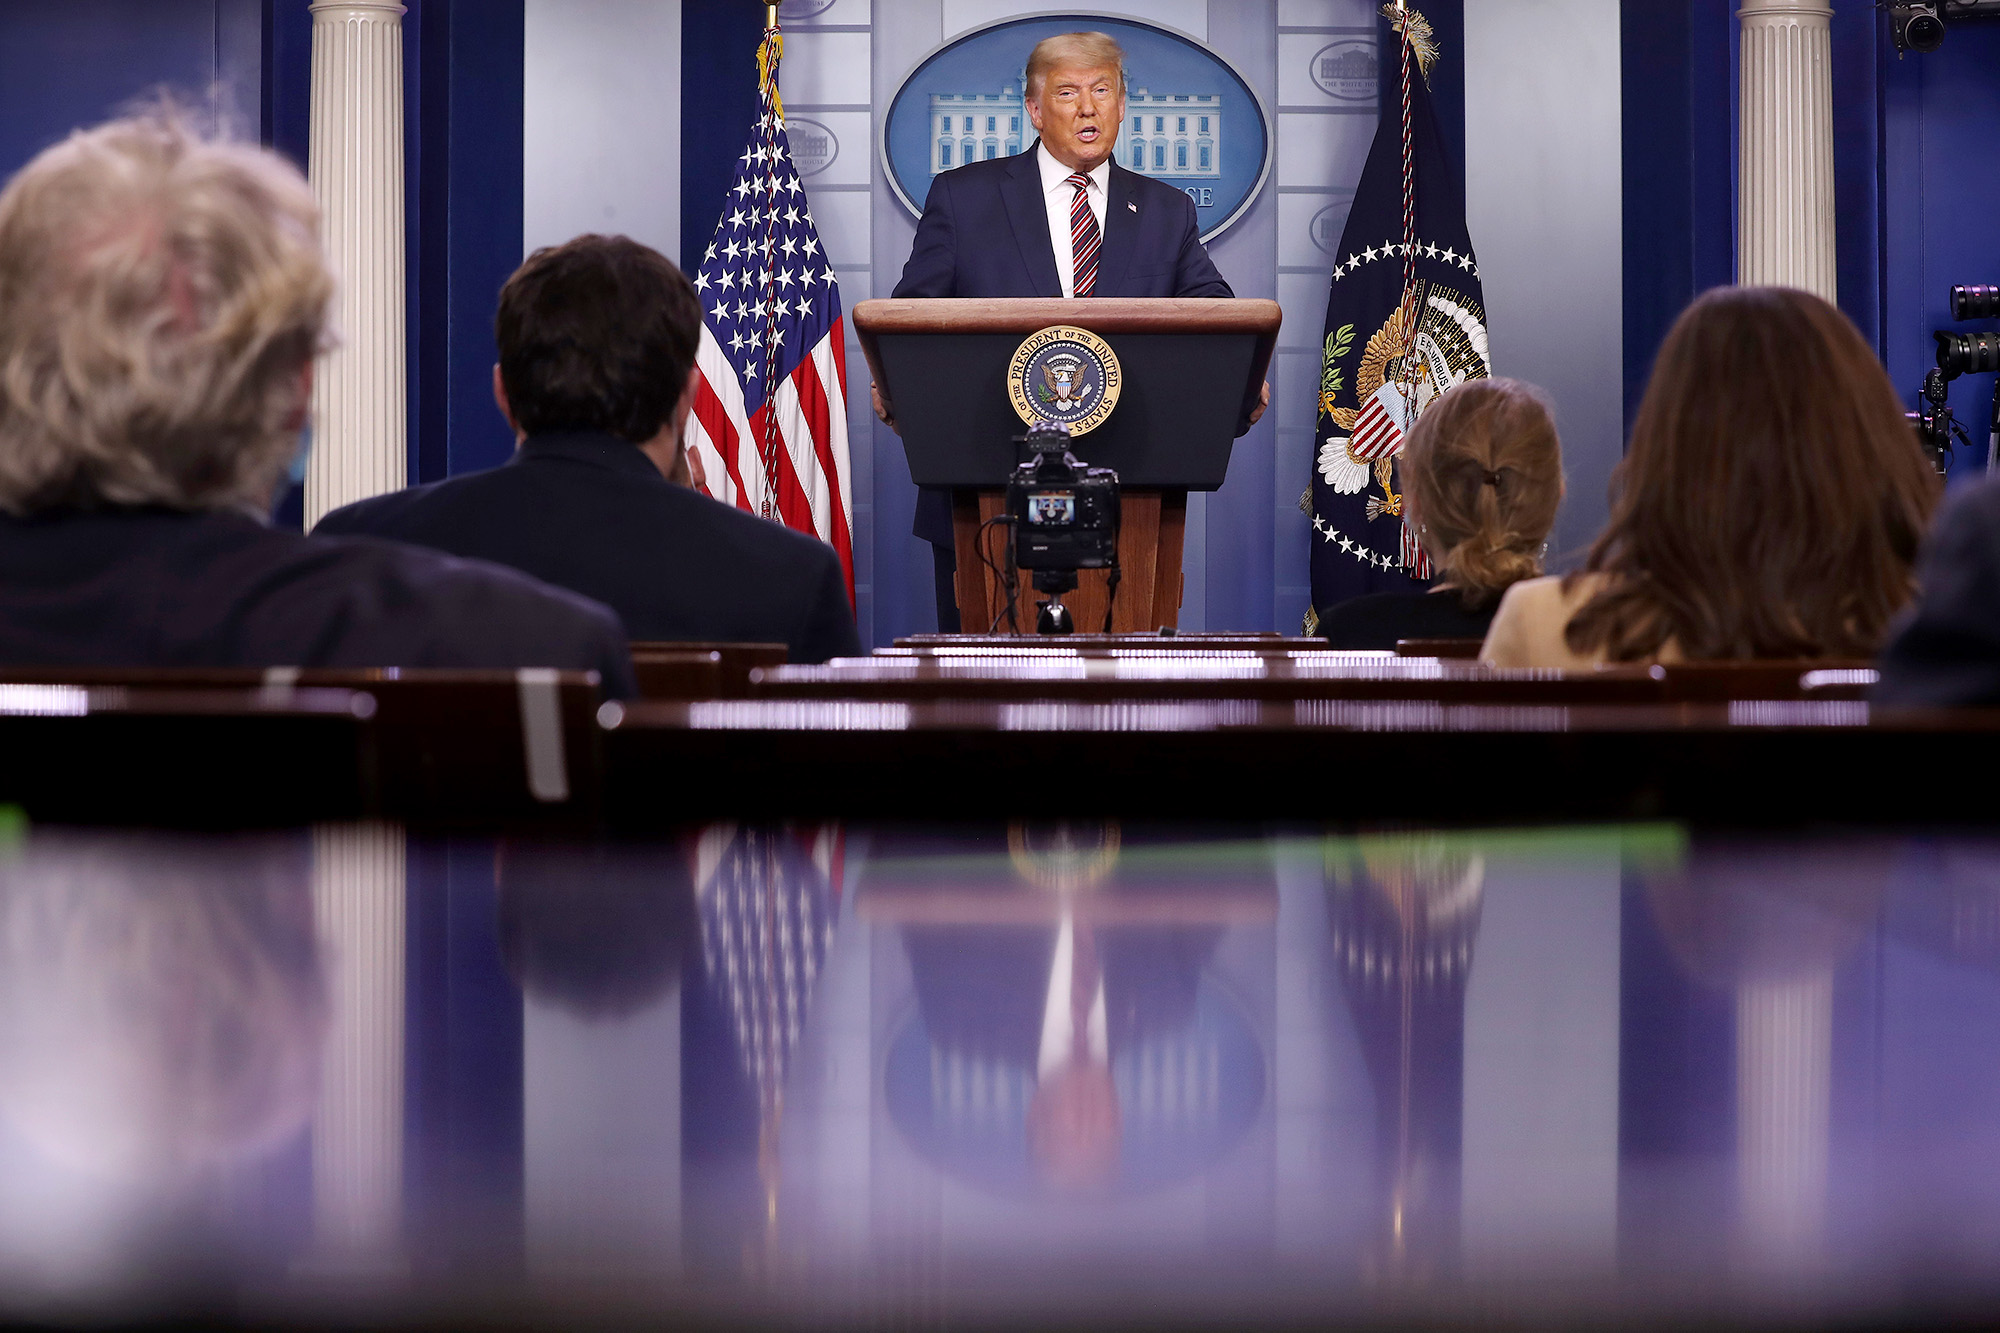 PHOTO: President Donald Trump speaks in the briefing room at the White House on Nov. 5, 2020.